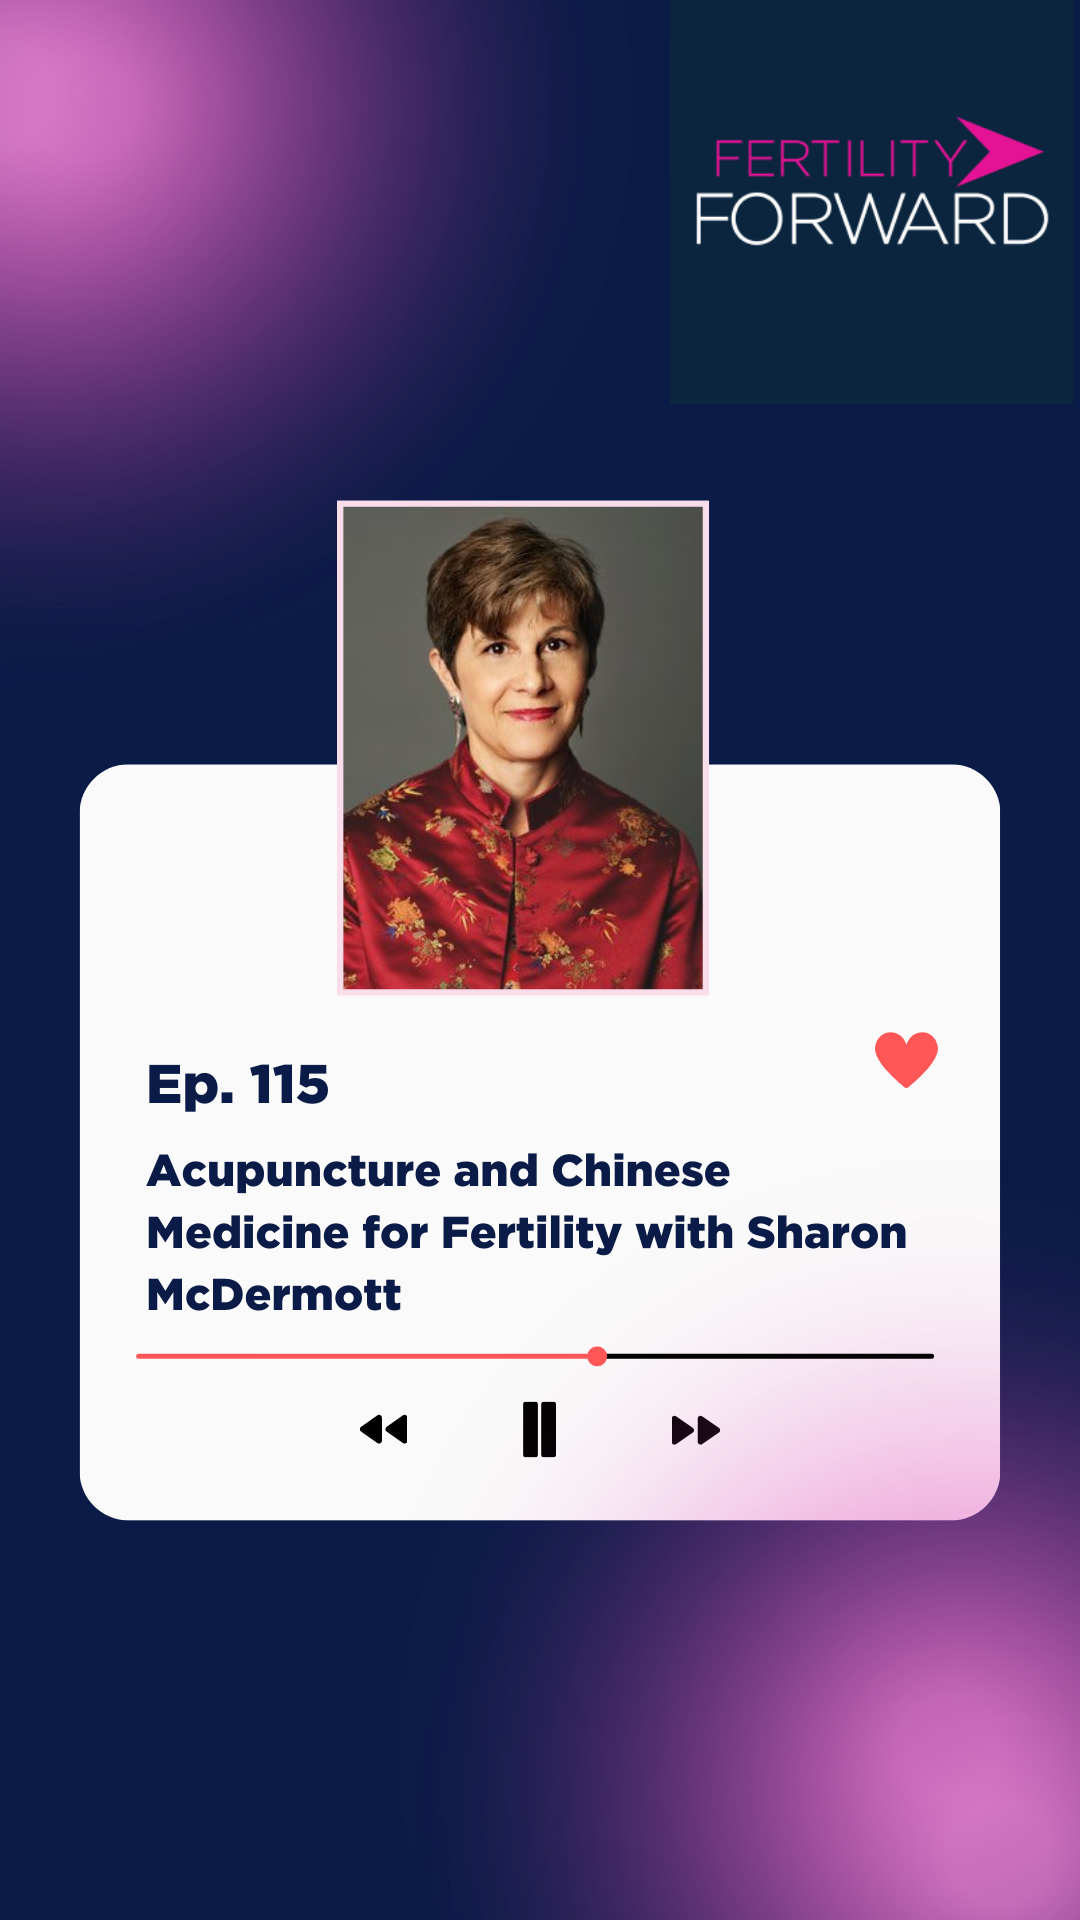 Ep 115: Acupuncture and Chinese Medicine for Fertility with Sharon McDermott